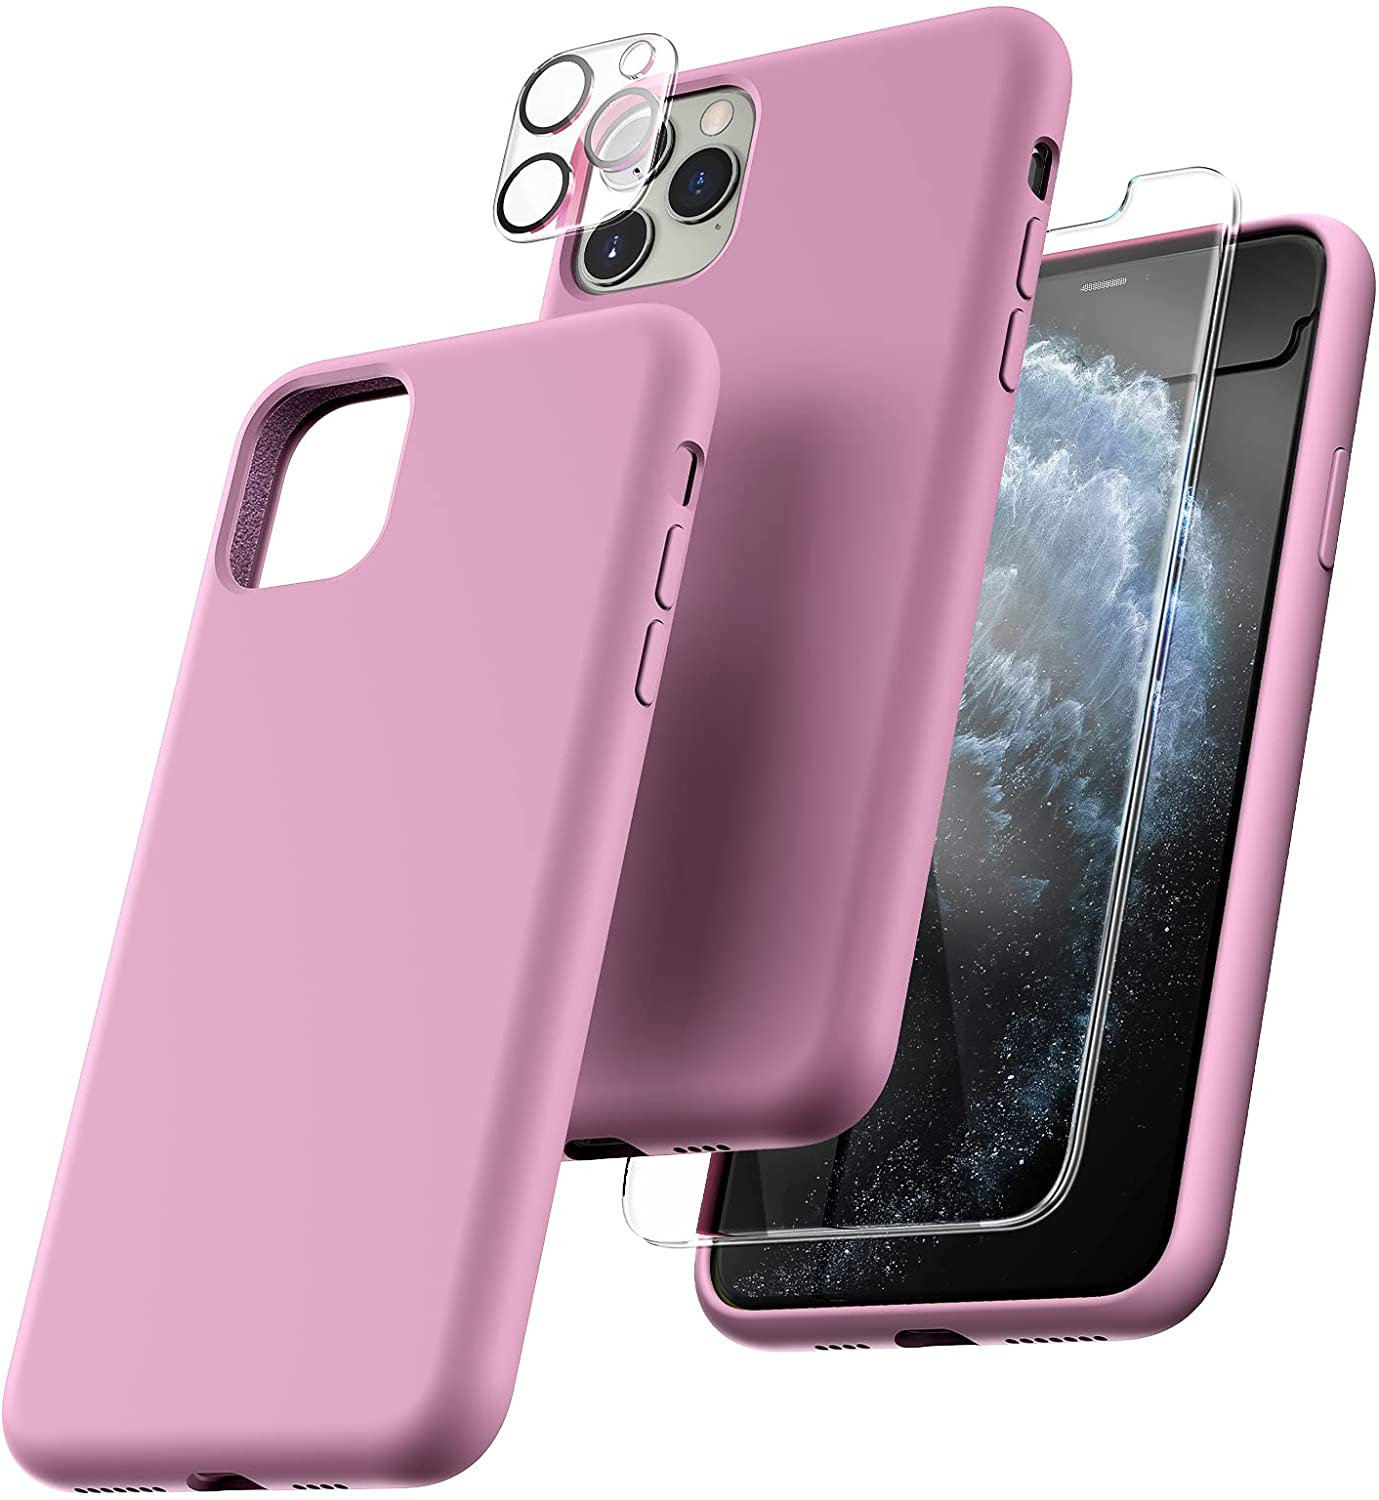 TOCOL [5 in 1] for iPhone 11 Pro Max Cases, with 2 Pack Screen Protector + 2 Pack Camera Lens Protector, Liquid Silicone Slim Shockproof Phone Case [Anti-Scratch] [Drop Protection] 6.5'', Lilac Purple